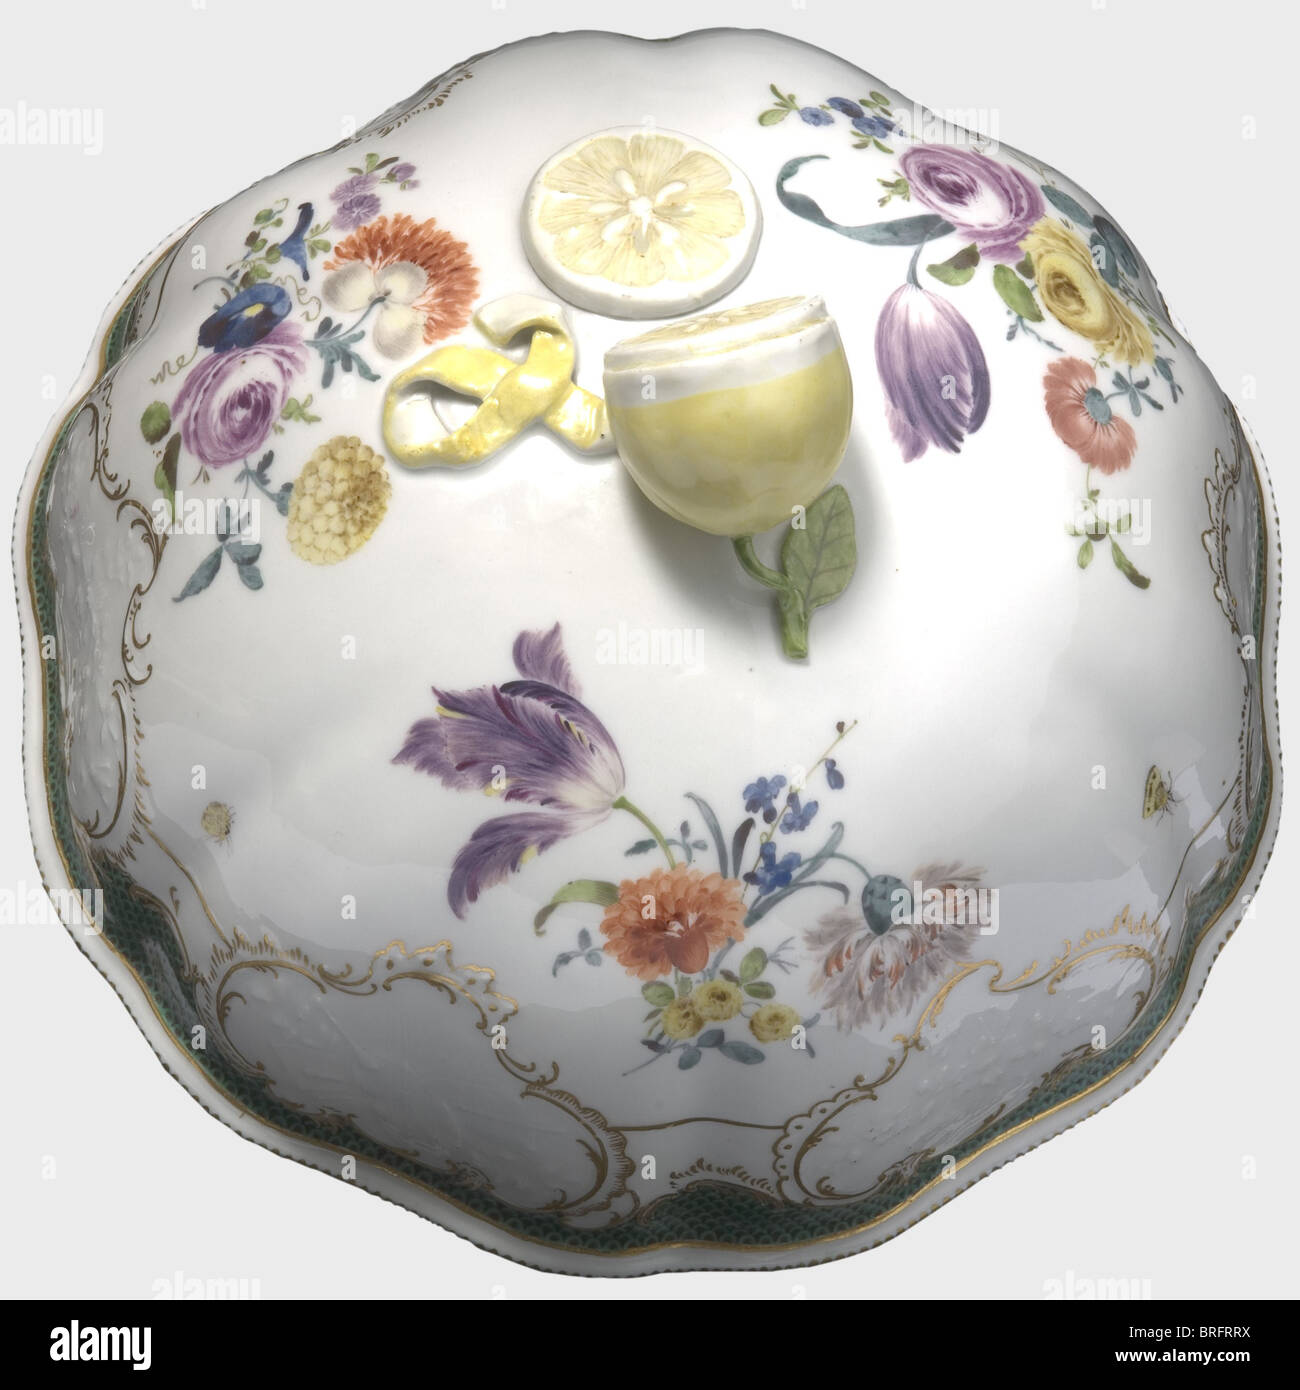 Friedrich II - General Joachim von Zieten(1699 - 1786)- a cloche,Meissen,circa 1760.Porcelain cloche,with a sliced lemon as a handle,hand-painted decorative flowers in colour,and a surrounding copper-green scalloped rim.Cartouches edged in gold with "Prussian-musical" decoration.An underglaze sword mark on the inside edge.Diameter 28.5 cm.Height 18 cm.The flower pattern with the green scalloped rim was specified for the Zieten service,which Frederick the Great presented to his Cavalry General von Zieten well before the Möllendorff Service.Cf.The,Additional-Rights-Clearences-Not Available Stock Photo